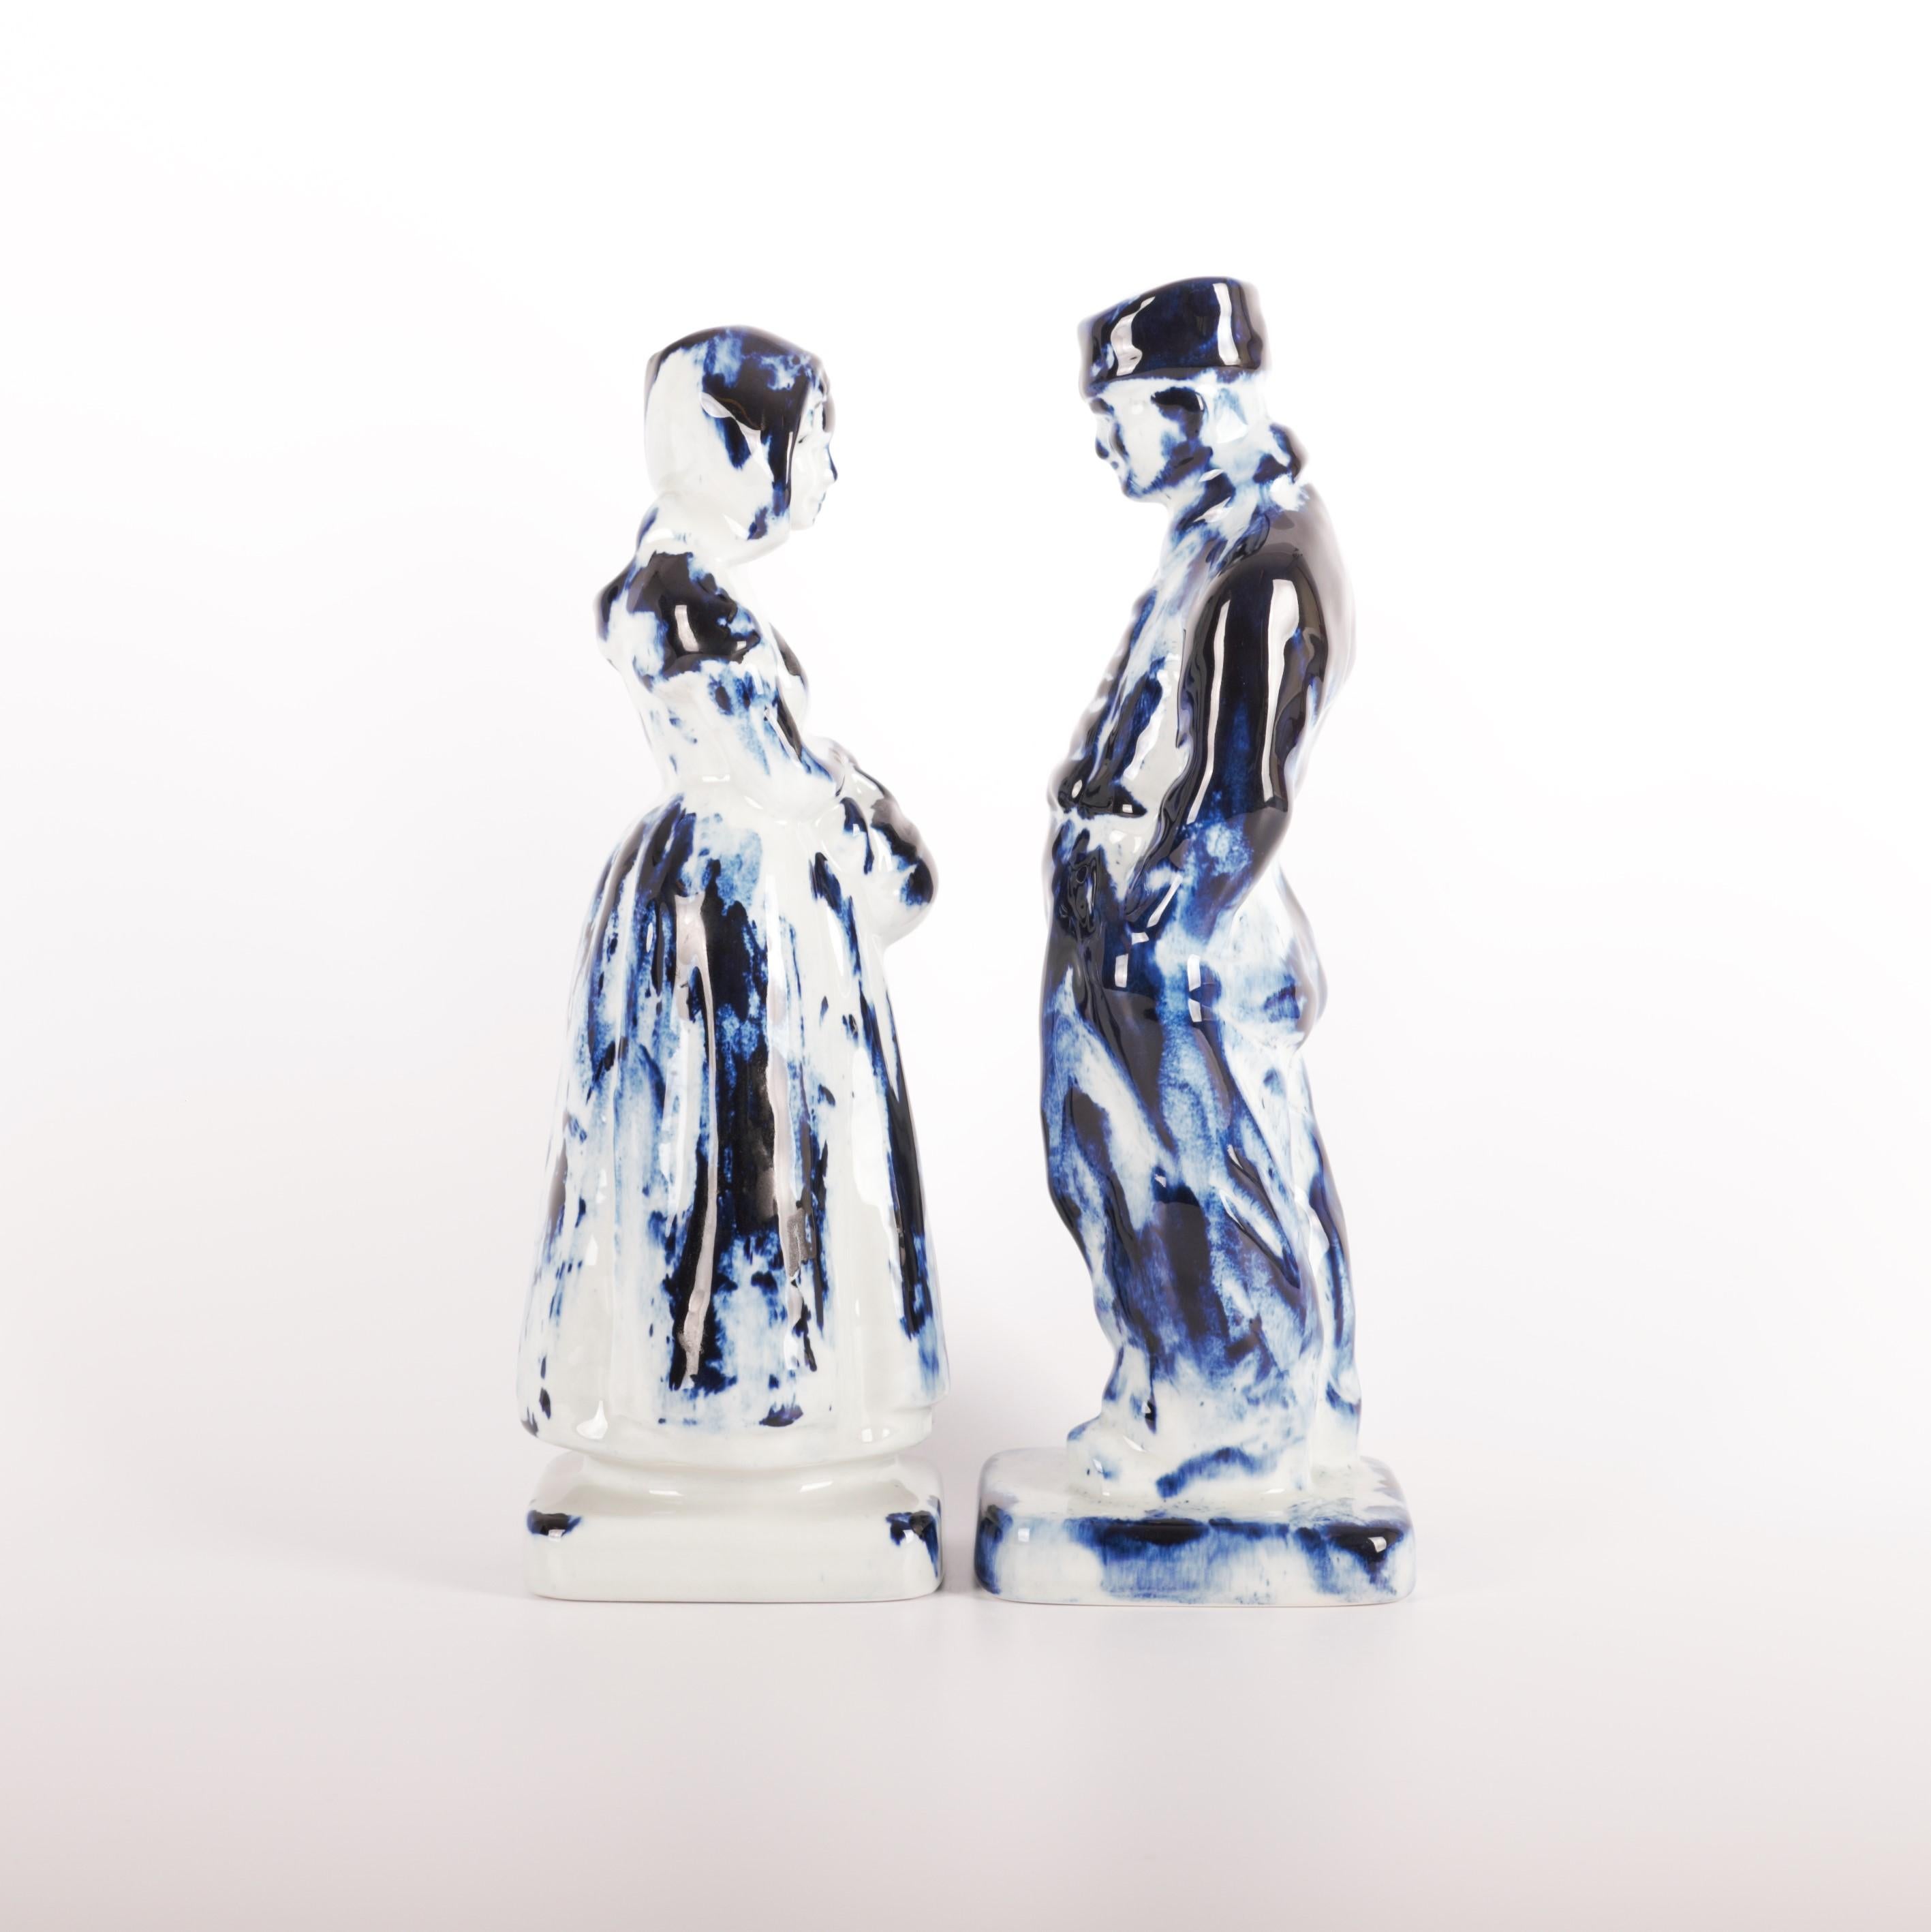 Ceramic Delft Blue Farmer & Farmer Wife #3, by Marcel Wanders, Hand Painted, 2006 Unique For Sale